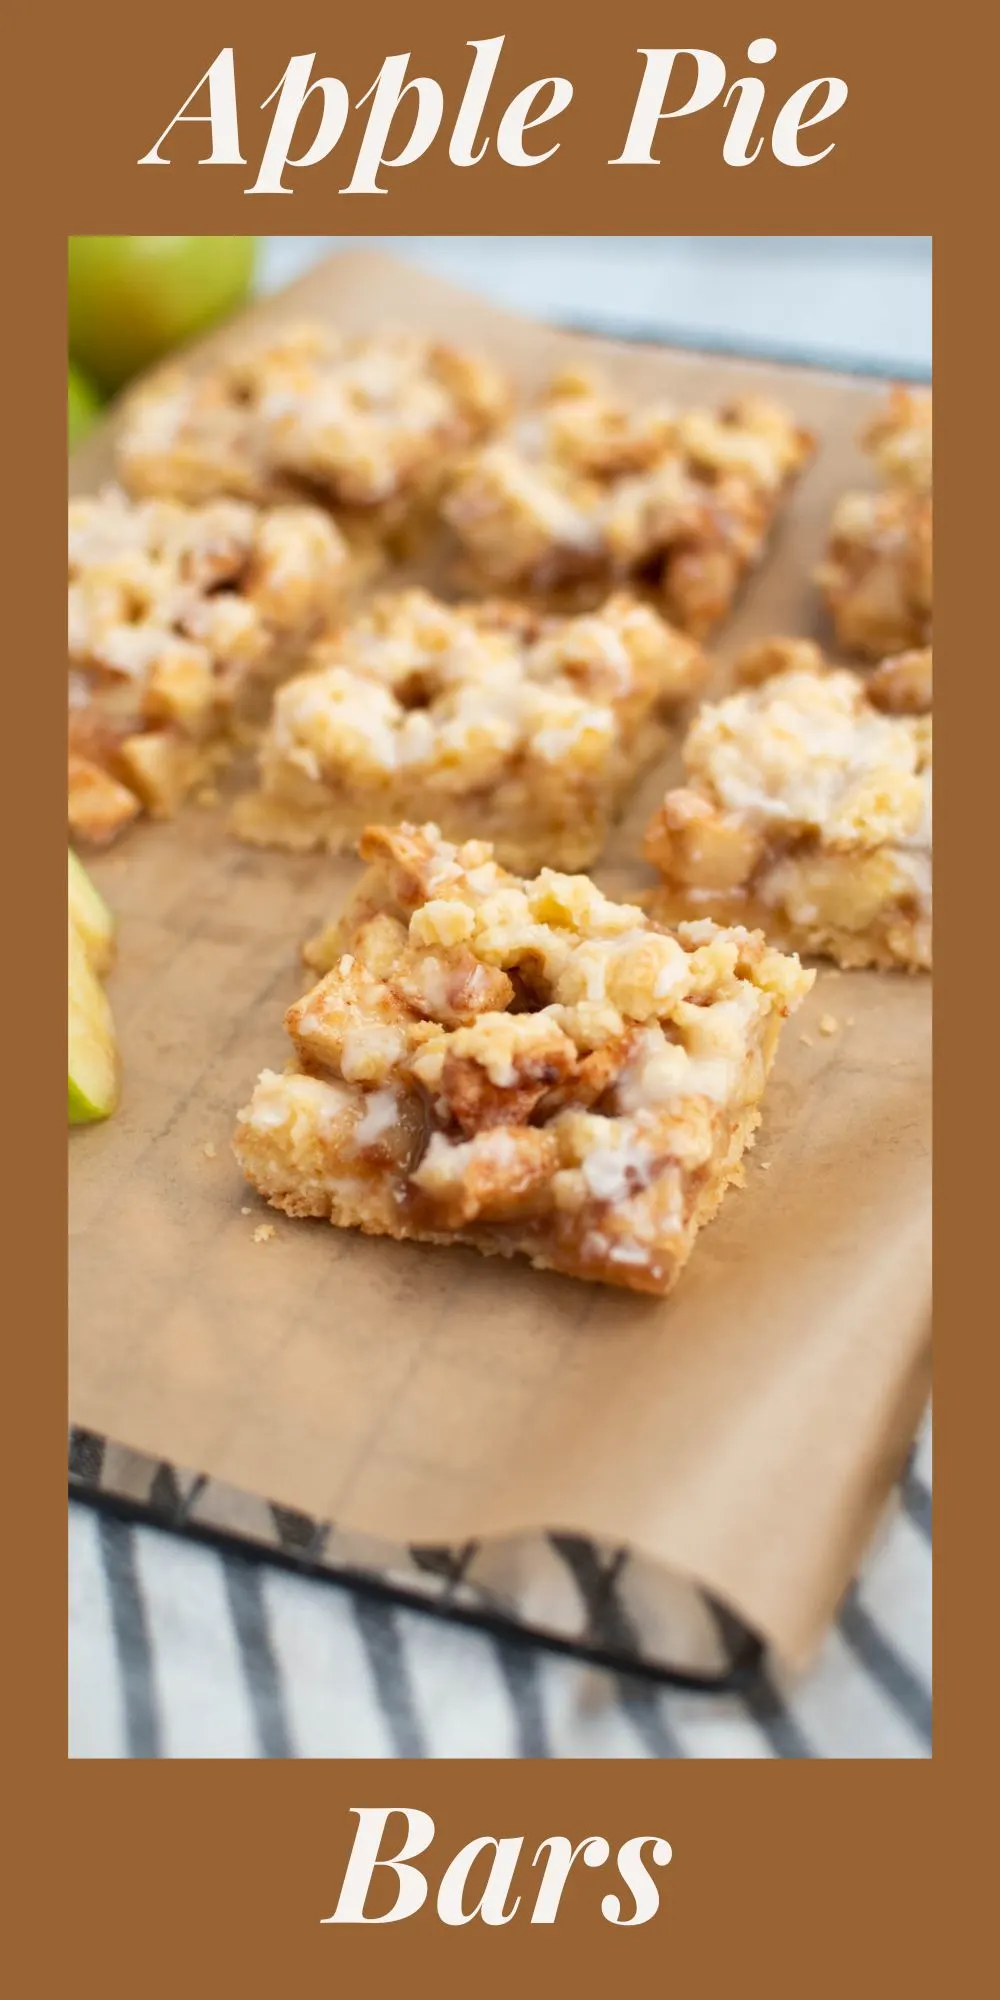 Pinterest graphic with text and photo of apple pie bars on parchment paper.